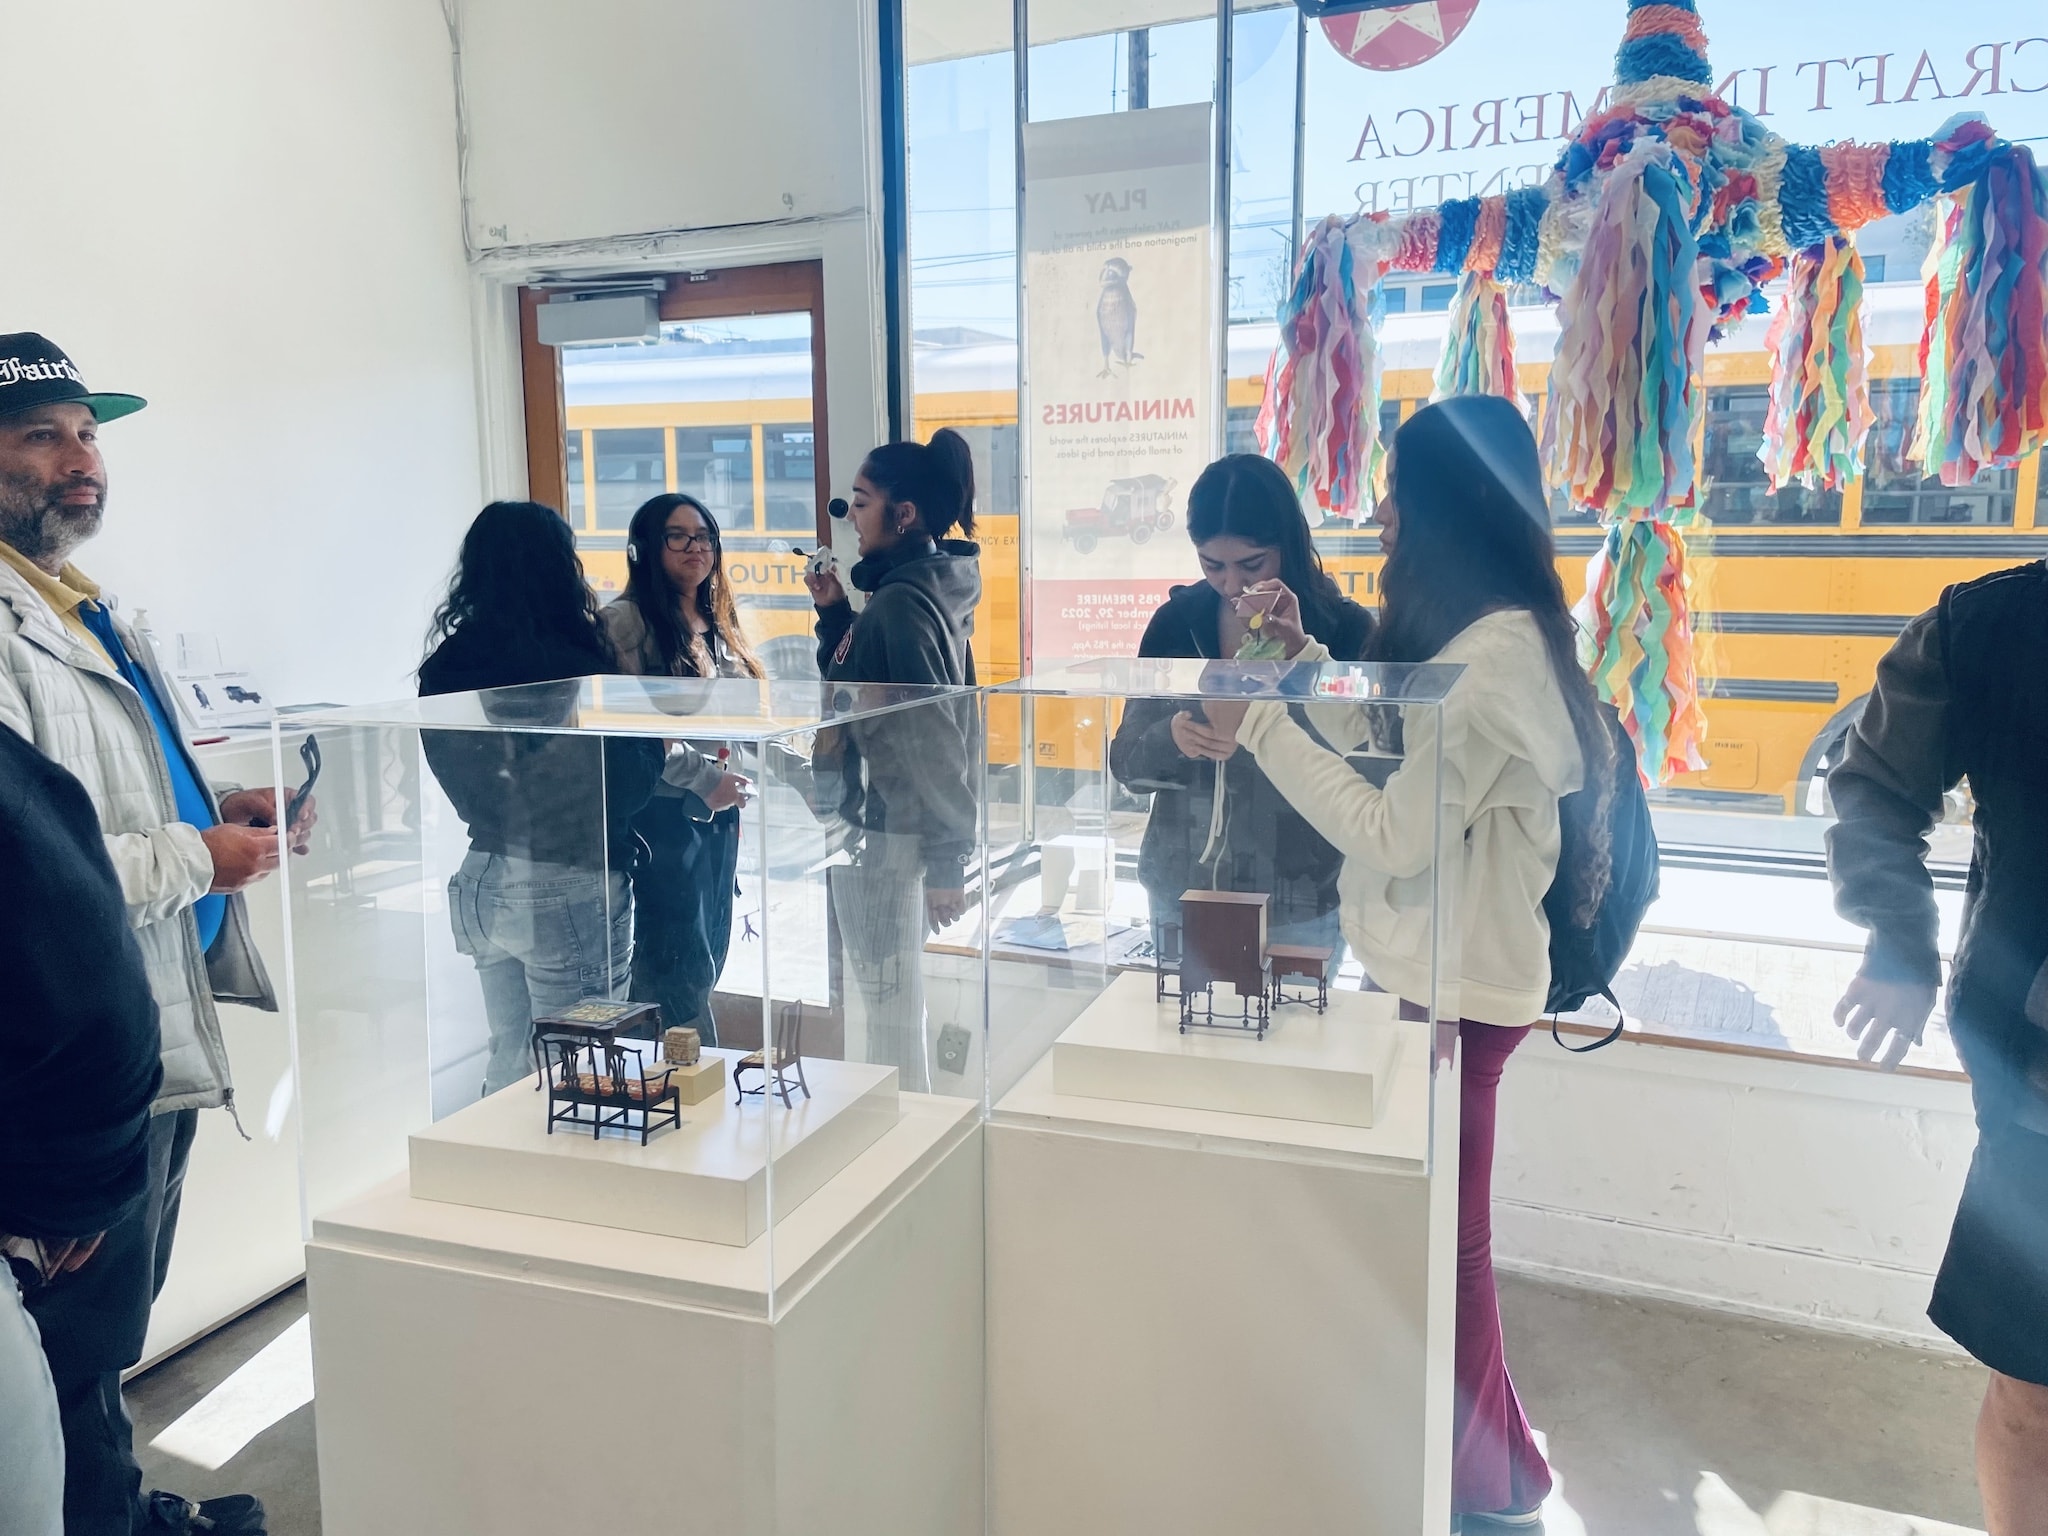 Candid moment of Fairfax High School art students studying Mark Murphy's displayed miniatures and Loren Robletto's giant window Piñata